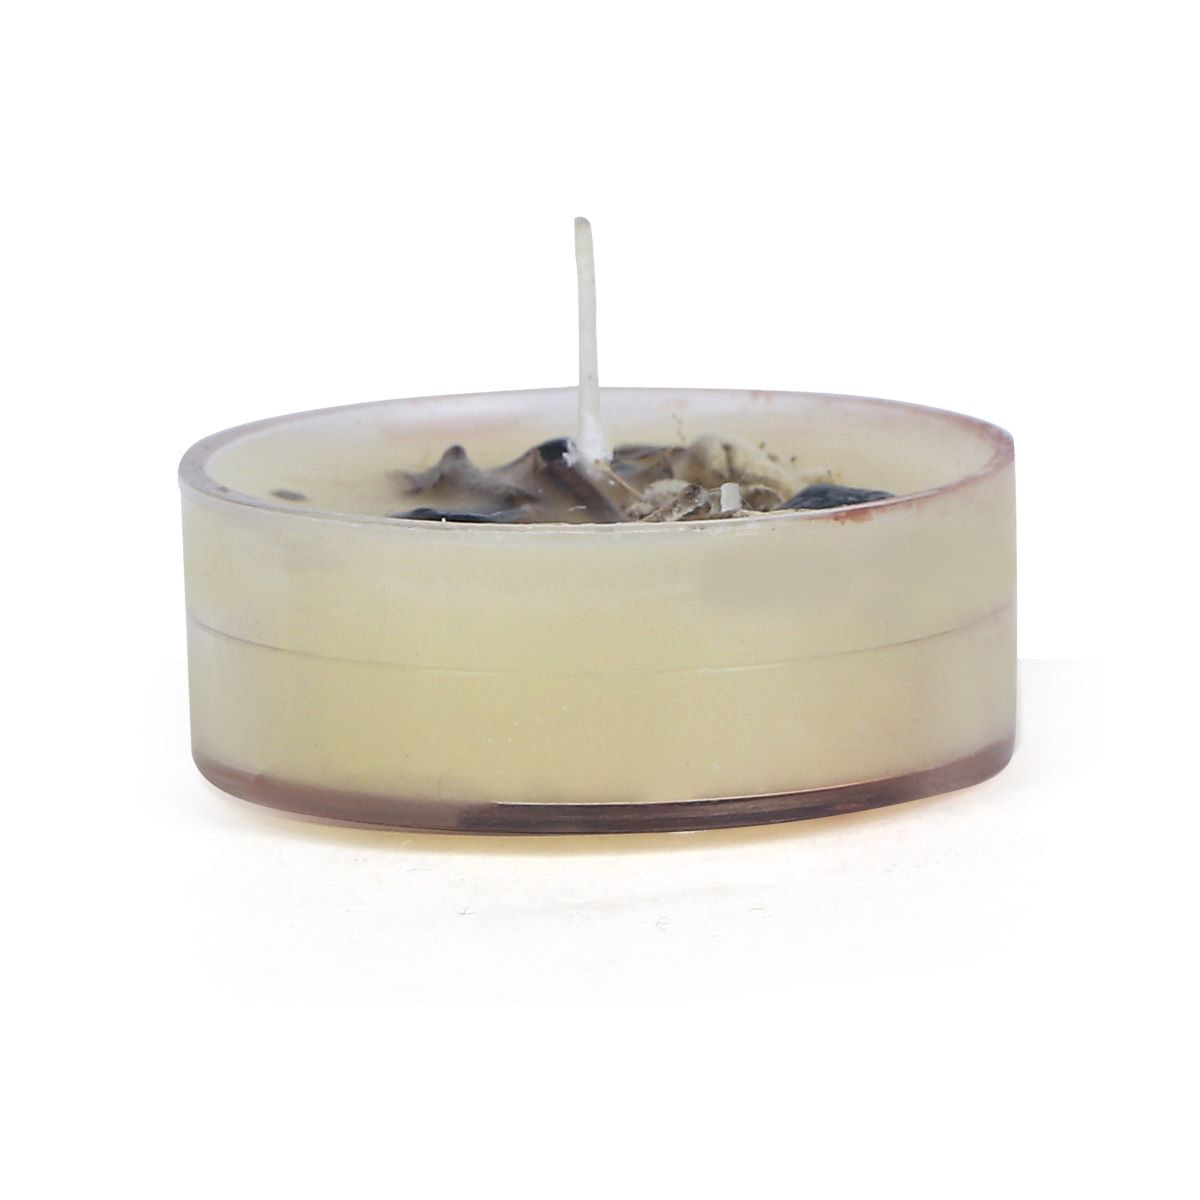 CocoVanilla Scented Bee's Wax Tea Light Candles (Set of 10)